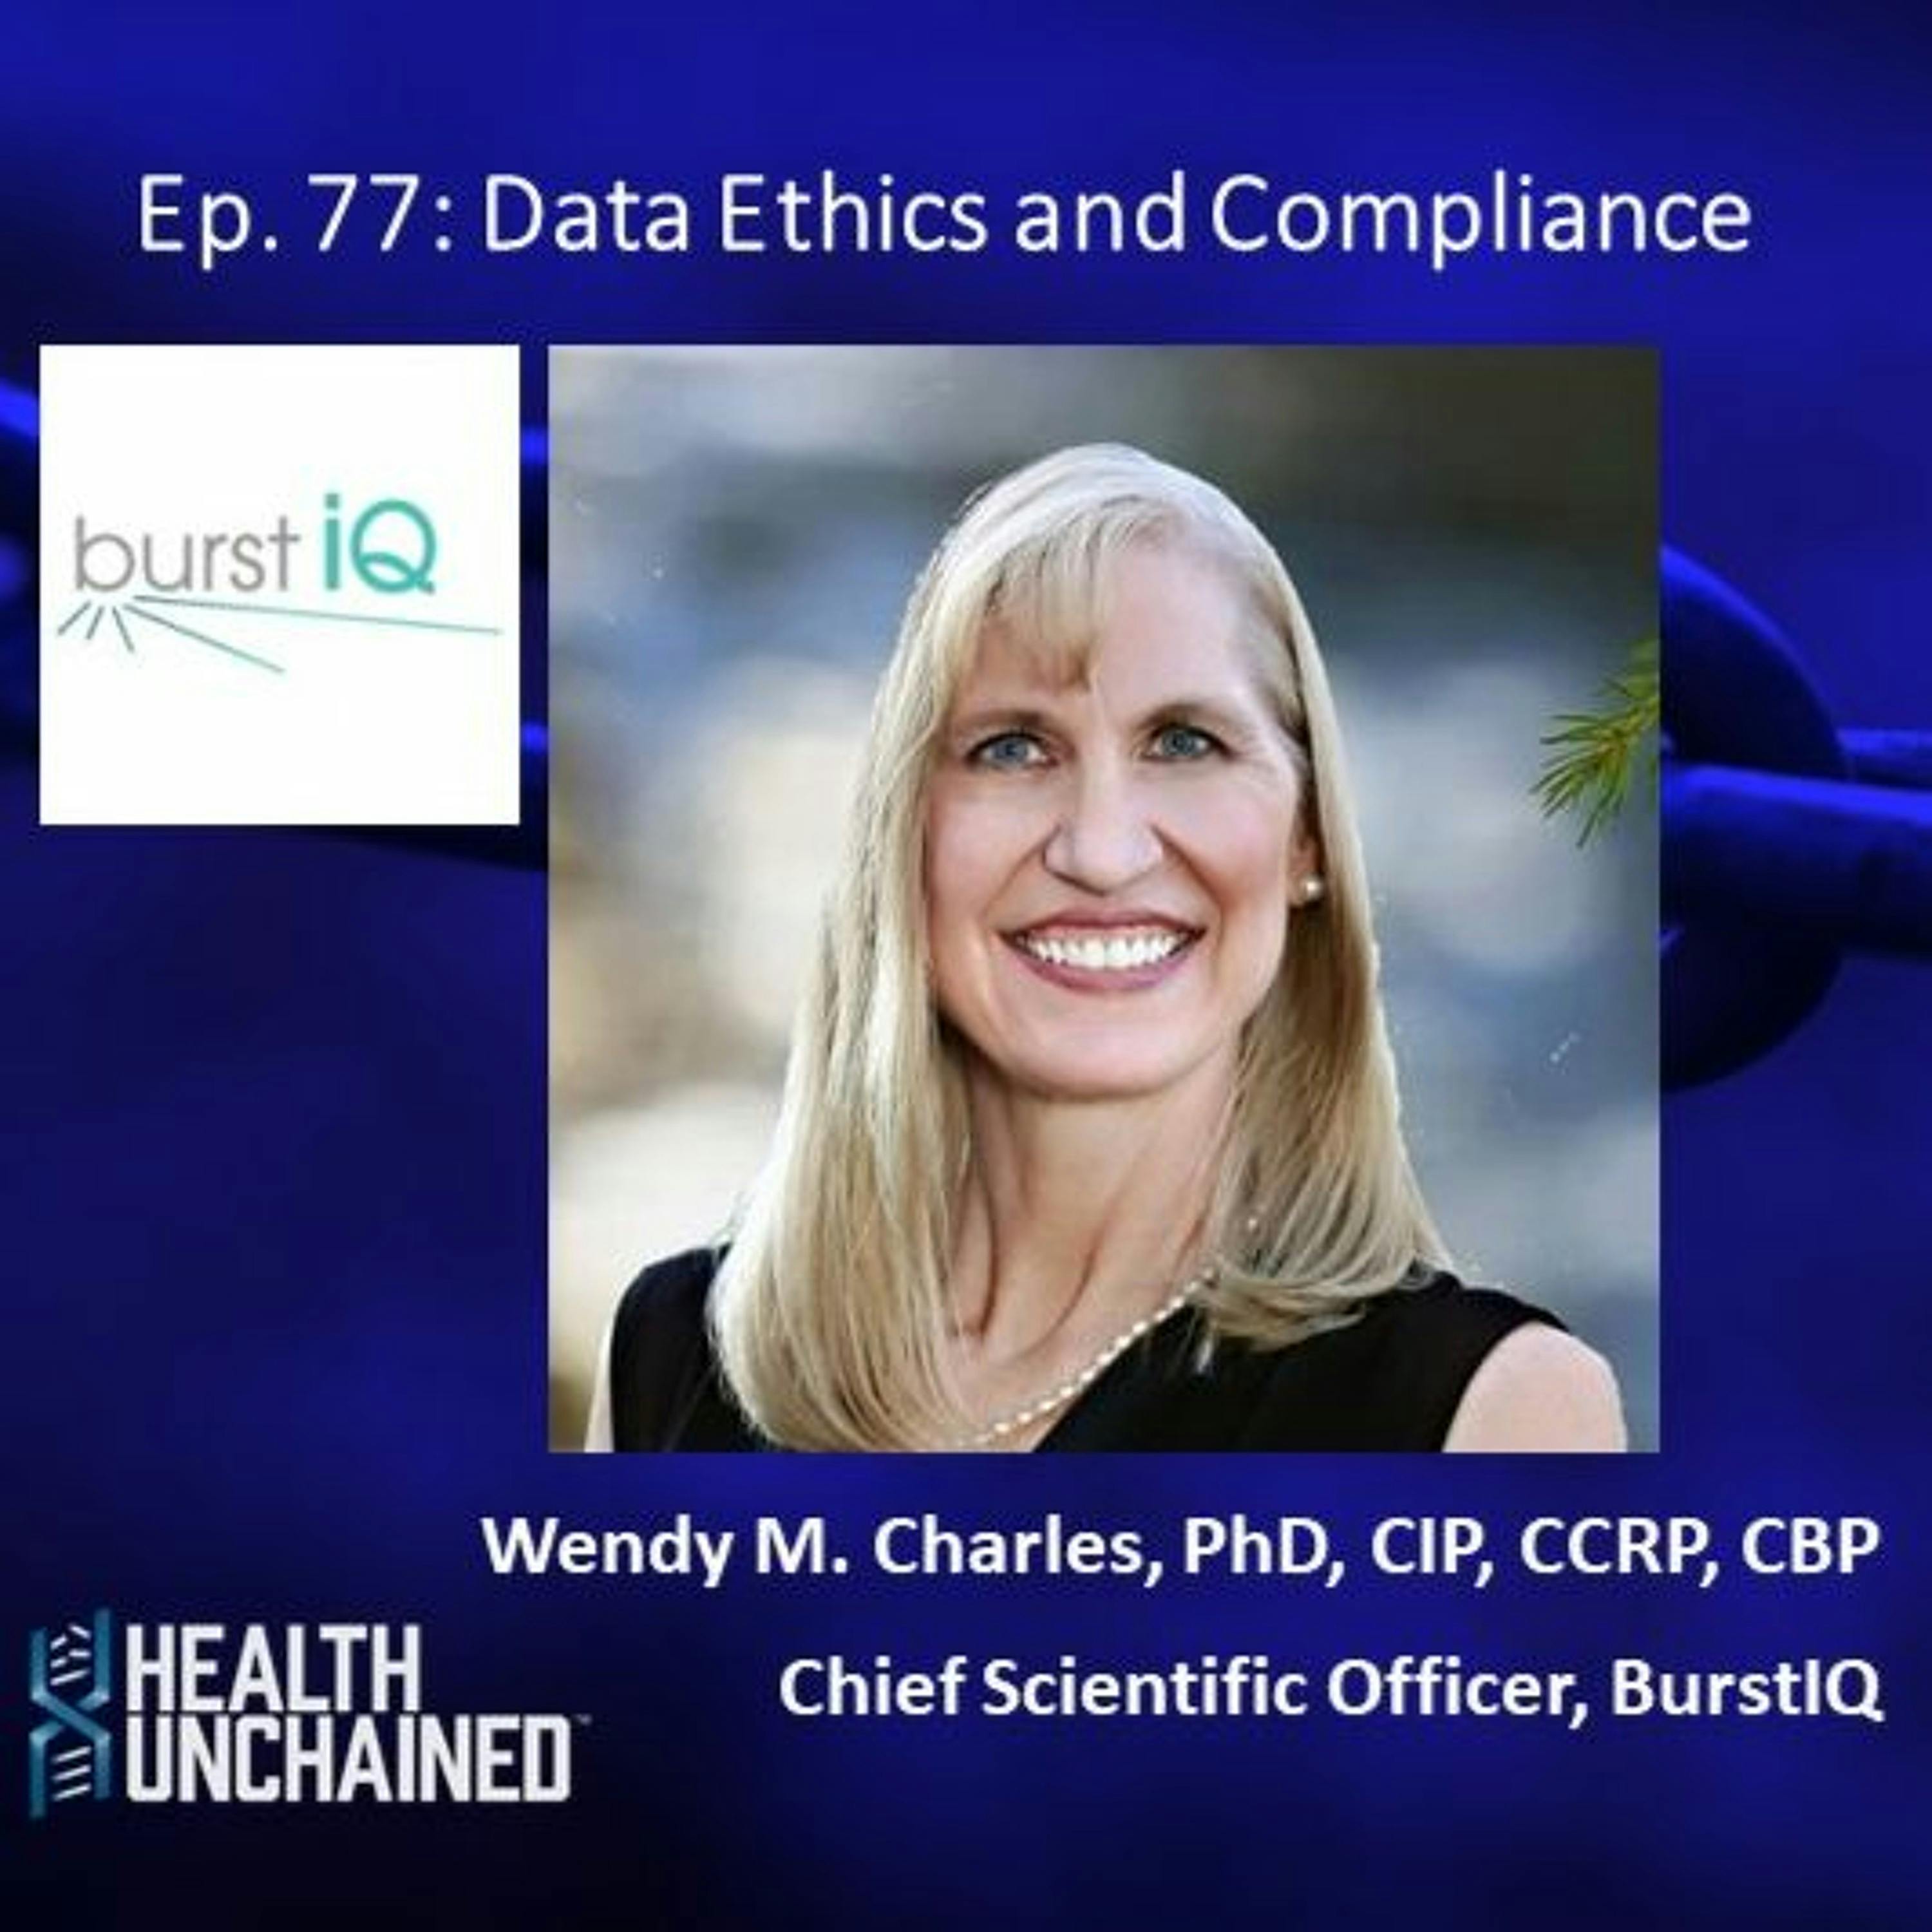 Ep. 77: Data Ethics and Compliance – Wendy M. Charles, PhD, CIP, CCRP, CBP